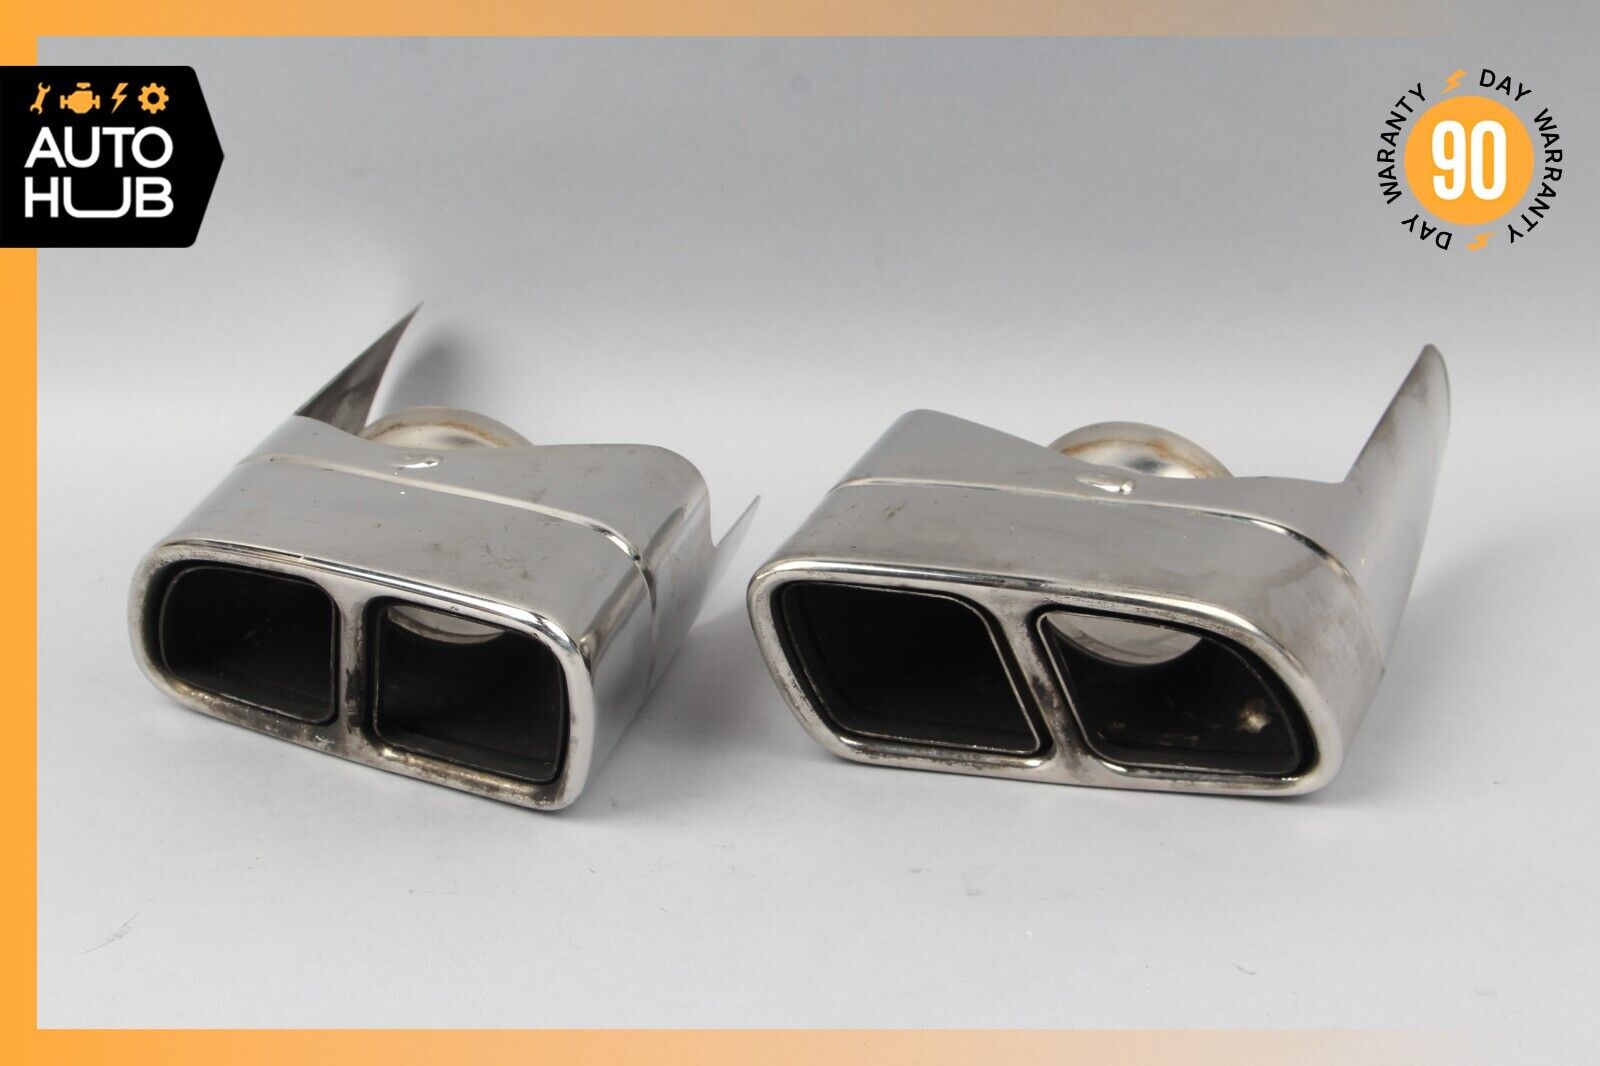 Mercedes W221 S600 CLA45 AMG Exhaust Muffler Tips Left and Right Set of 2 OEM